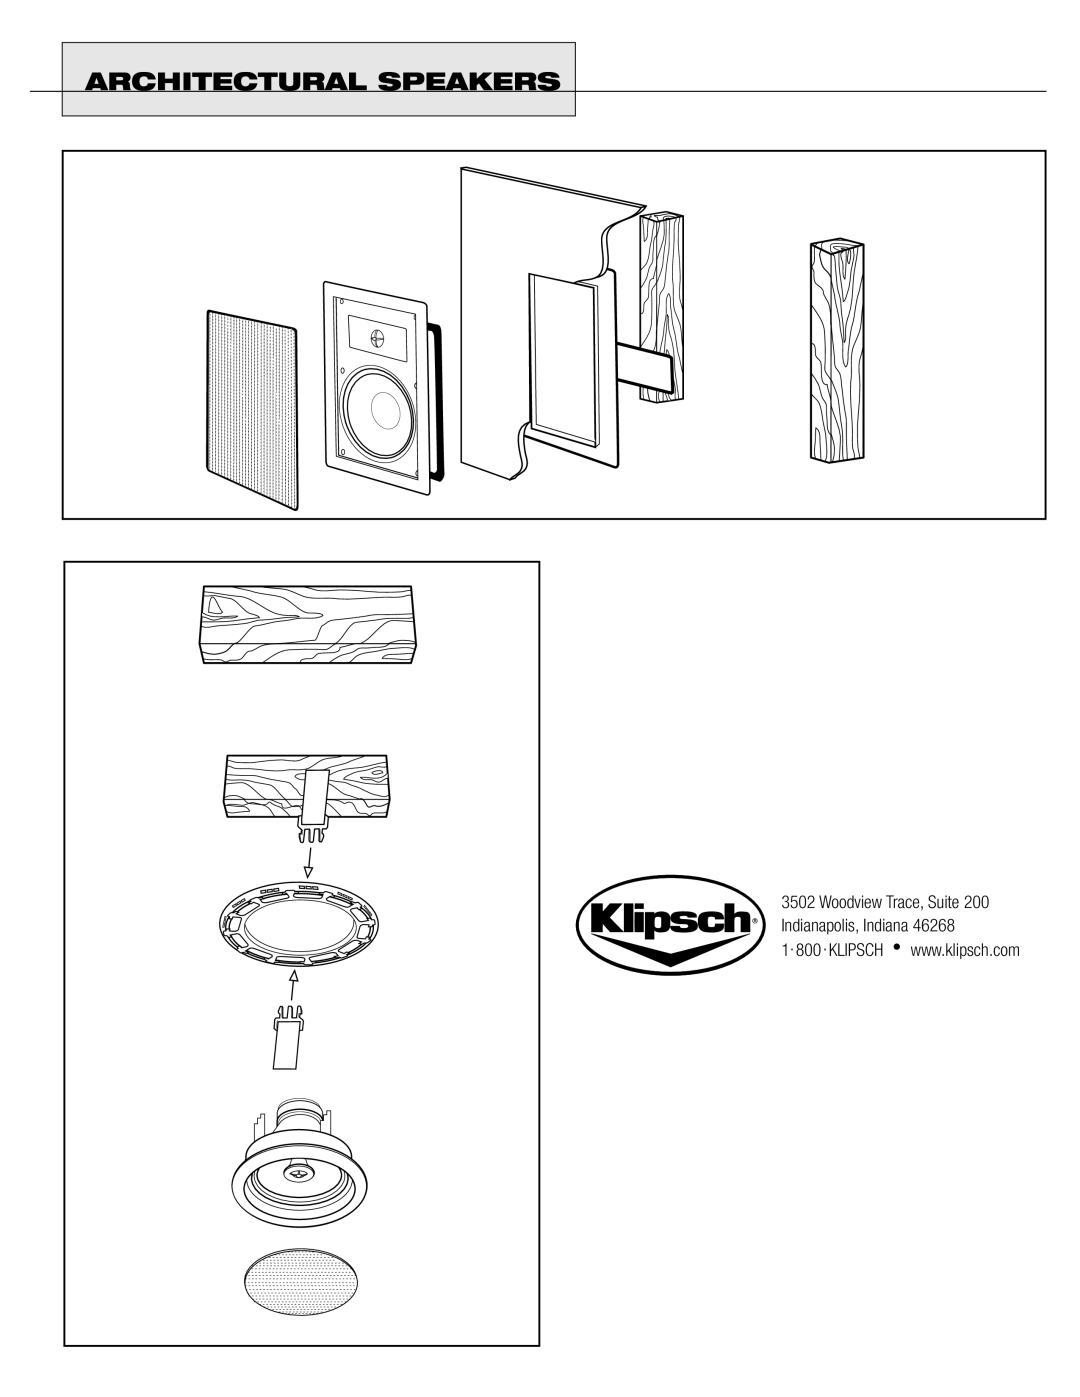 Klipsch CS ARCHITECTURAL owner manual Architectural Speakers 